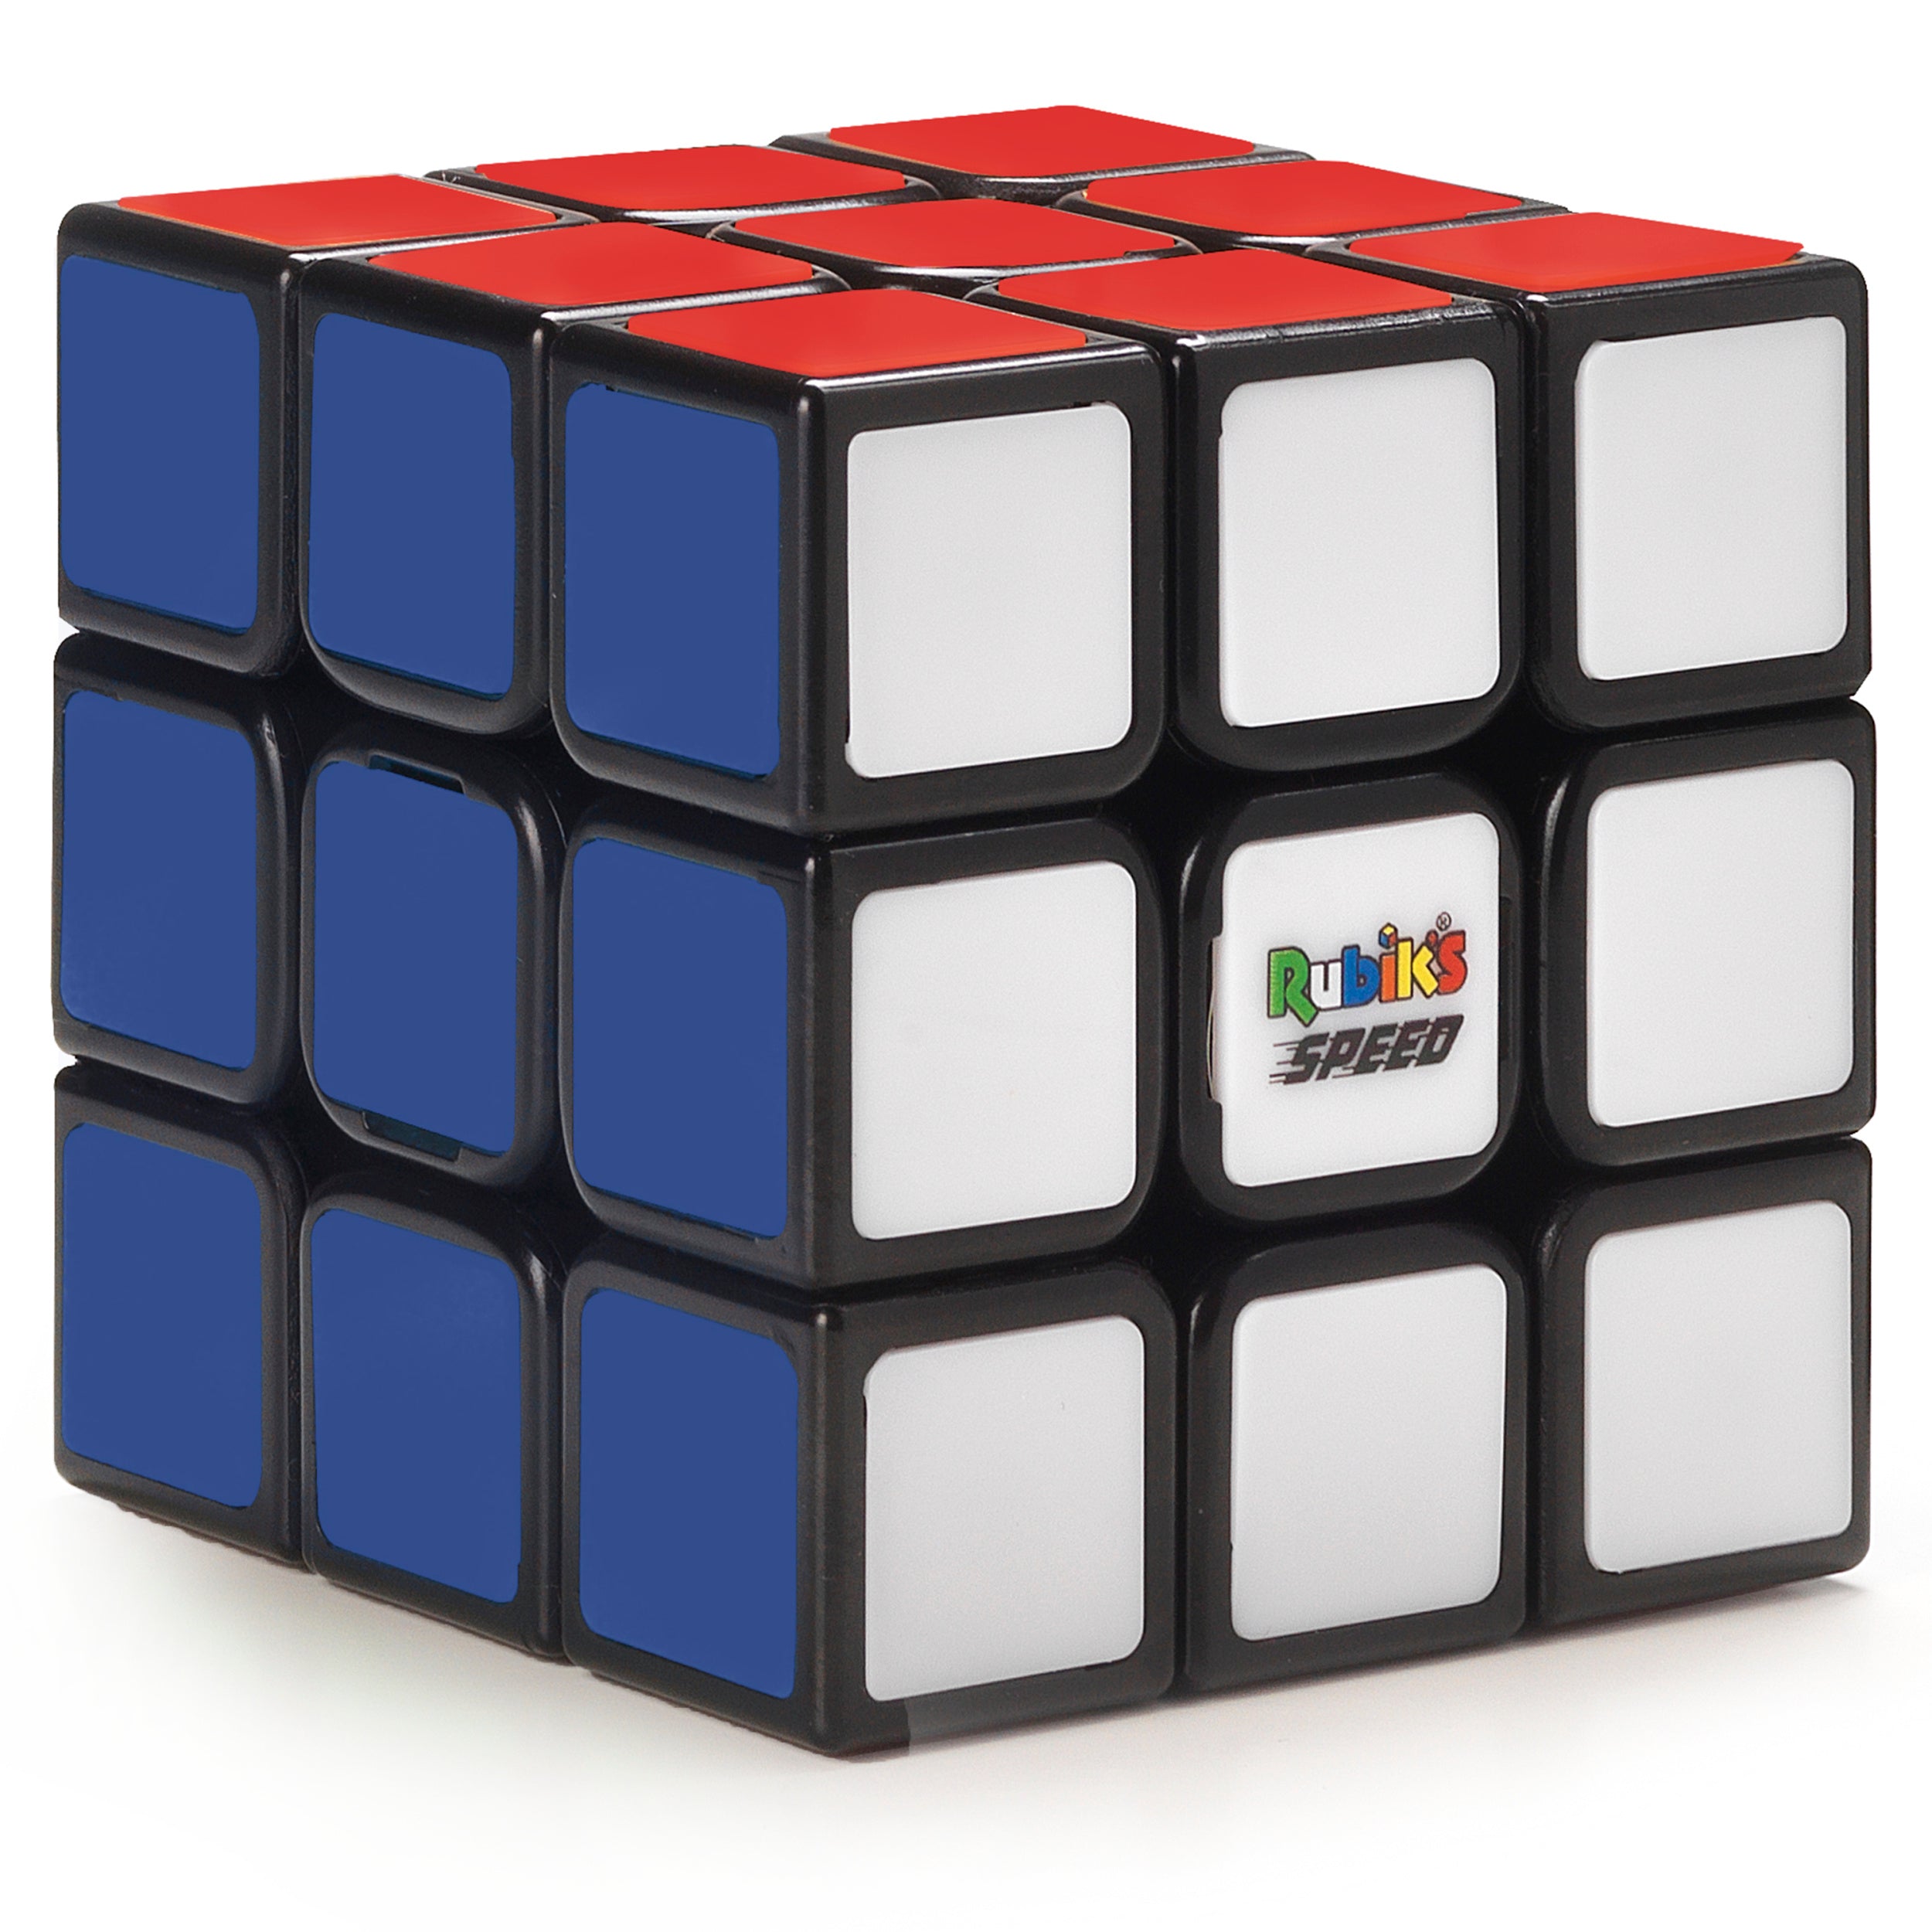 biologi med tiden betale Rubik's Cube, 3x3 Magnetic Speed Cube, Super Fast Problem-Solving  Challenging Retro Fidget Toy Travel Brain Teaser, for Adults & Kids Ages 8  and up – Shop Spin Master